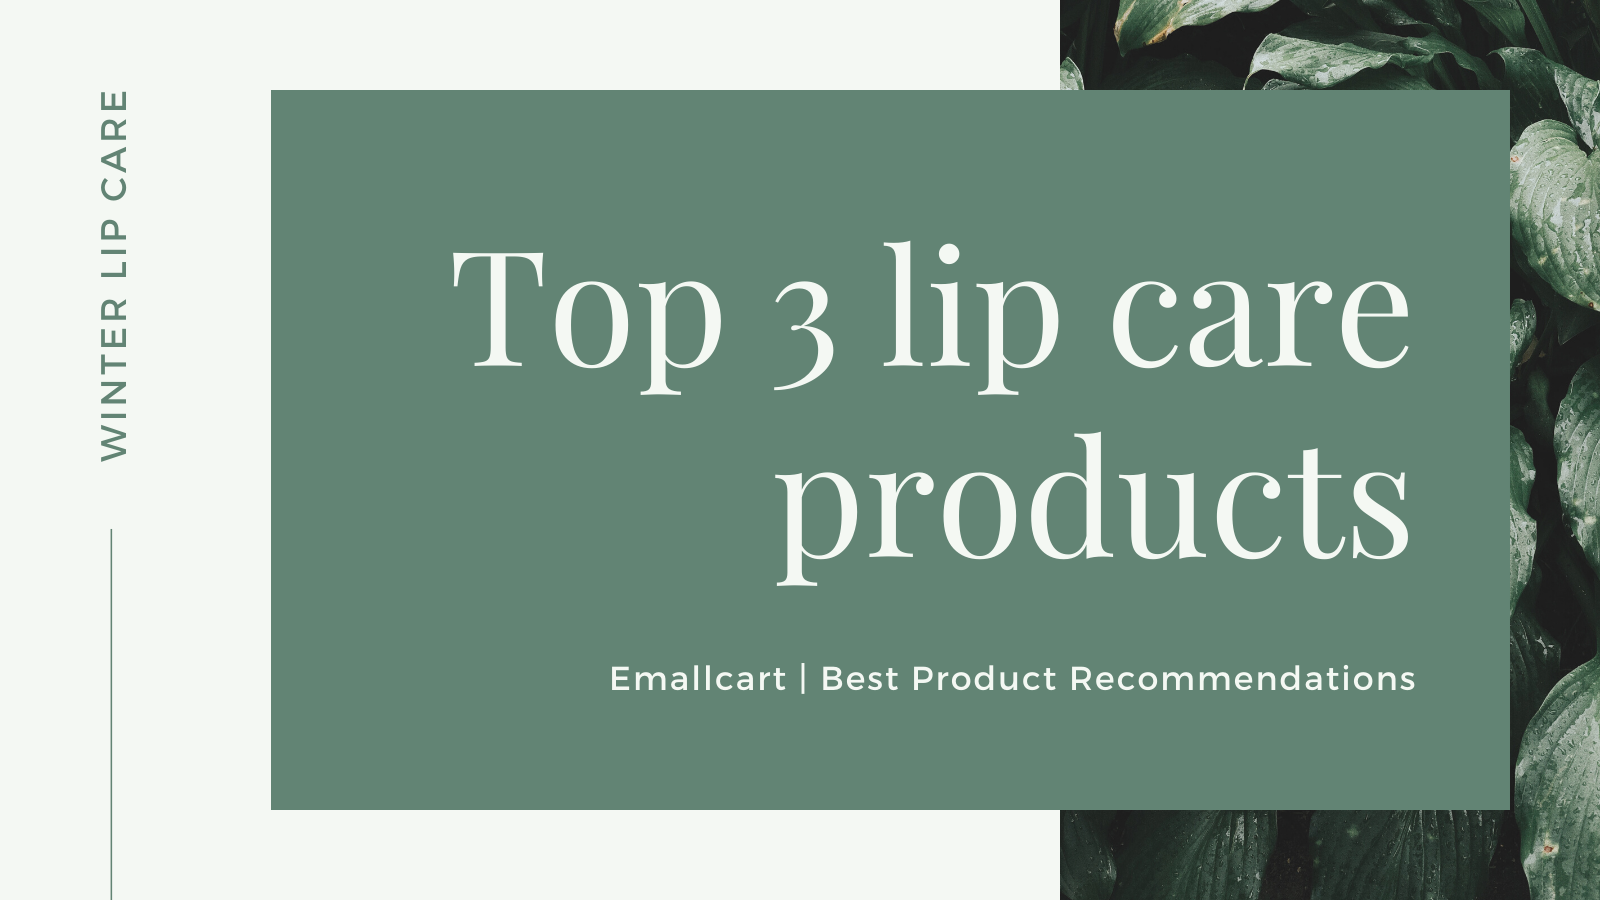 Top 3 lip care products for this winter